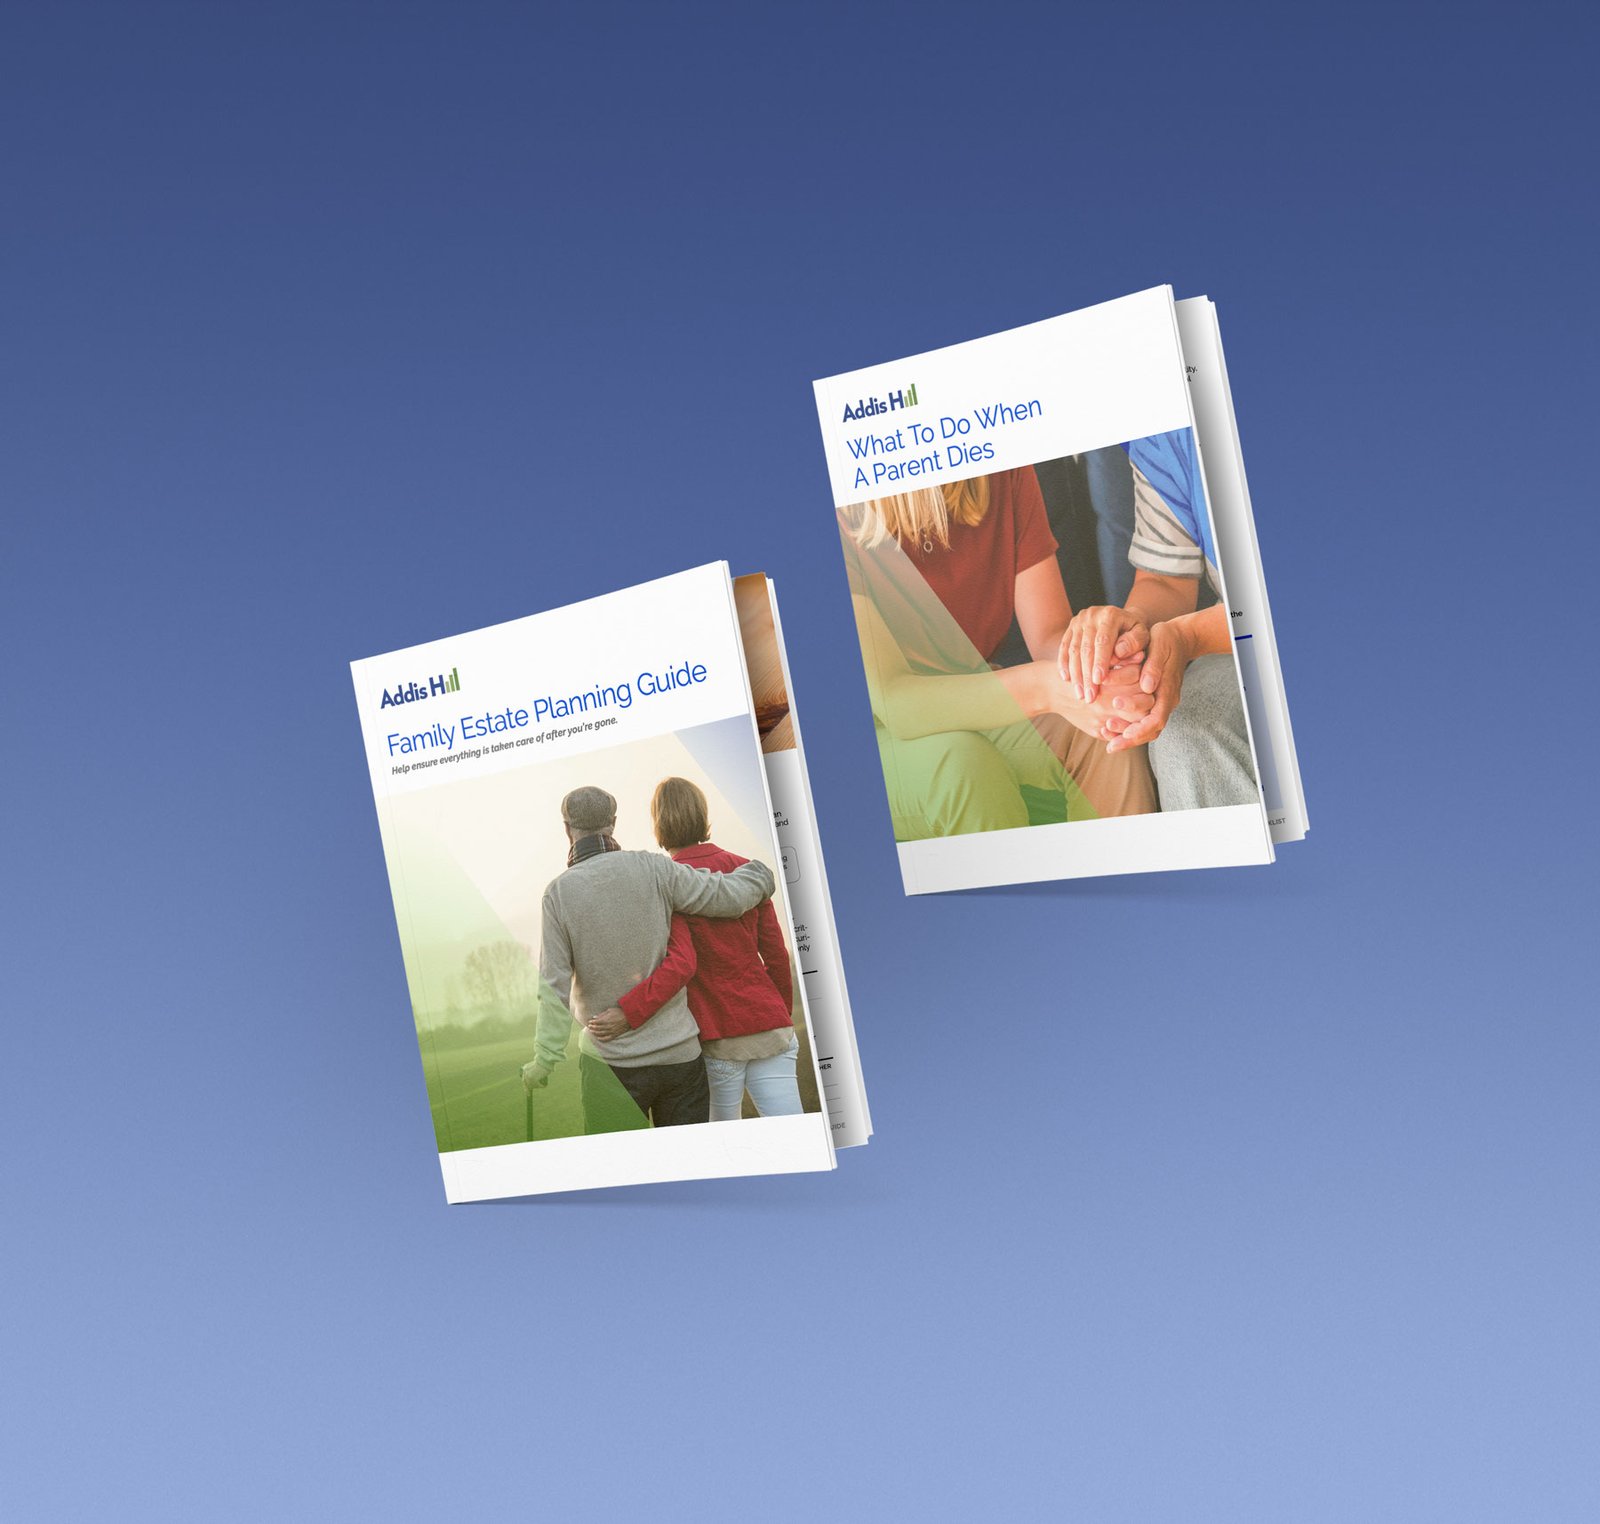 An image of two Estate planning guides from Addis Hill Financial Advisors